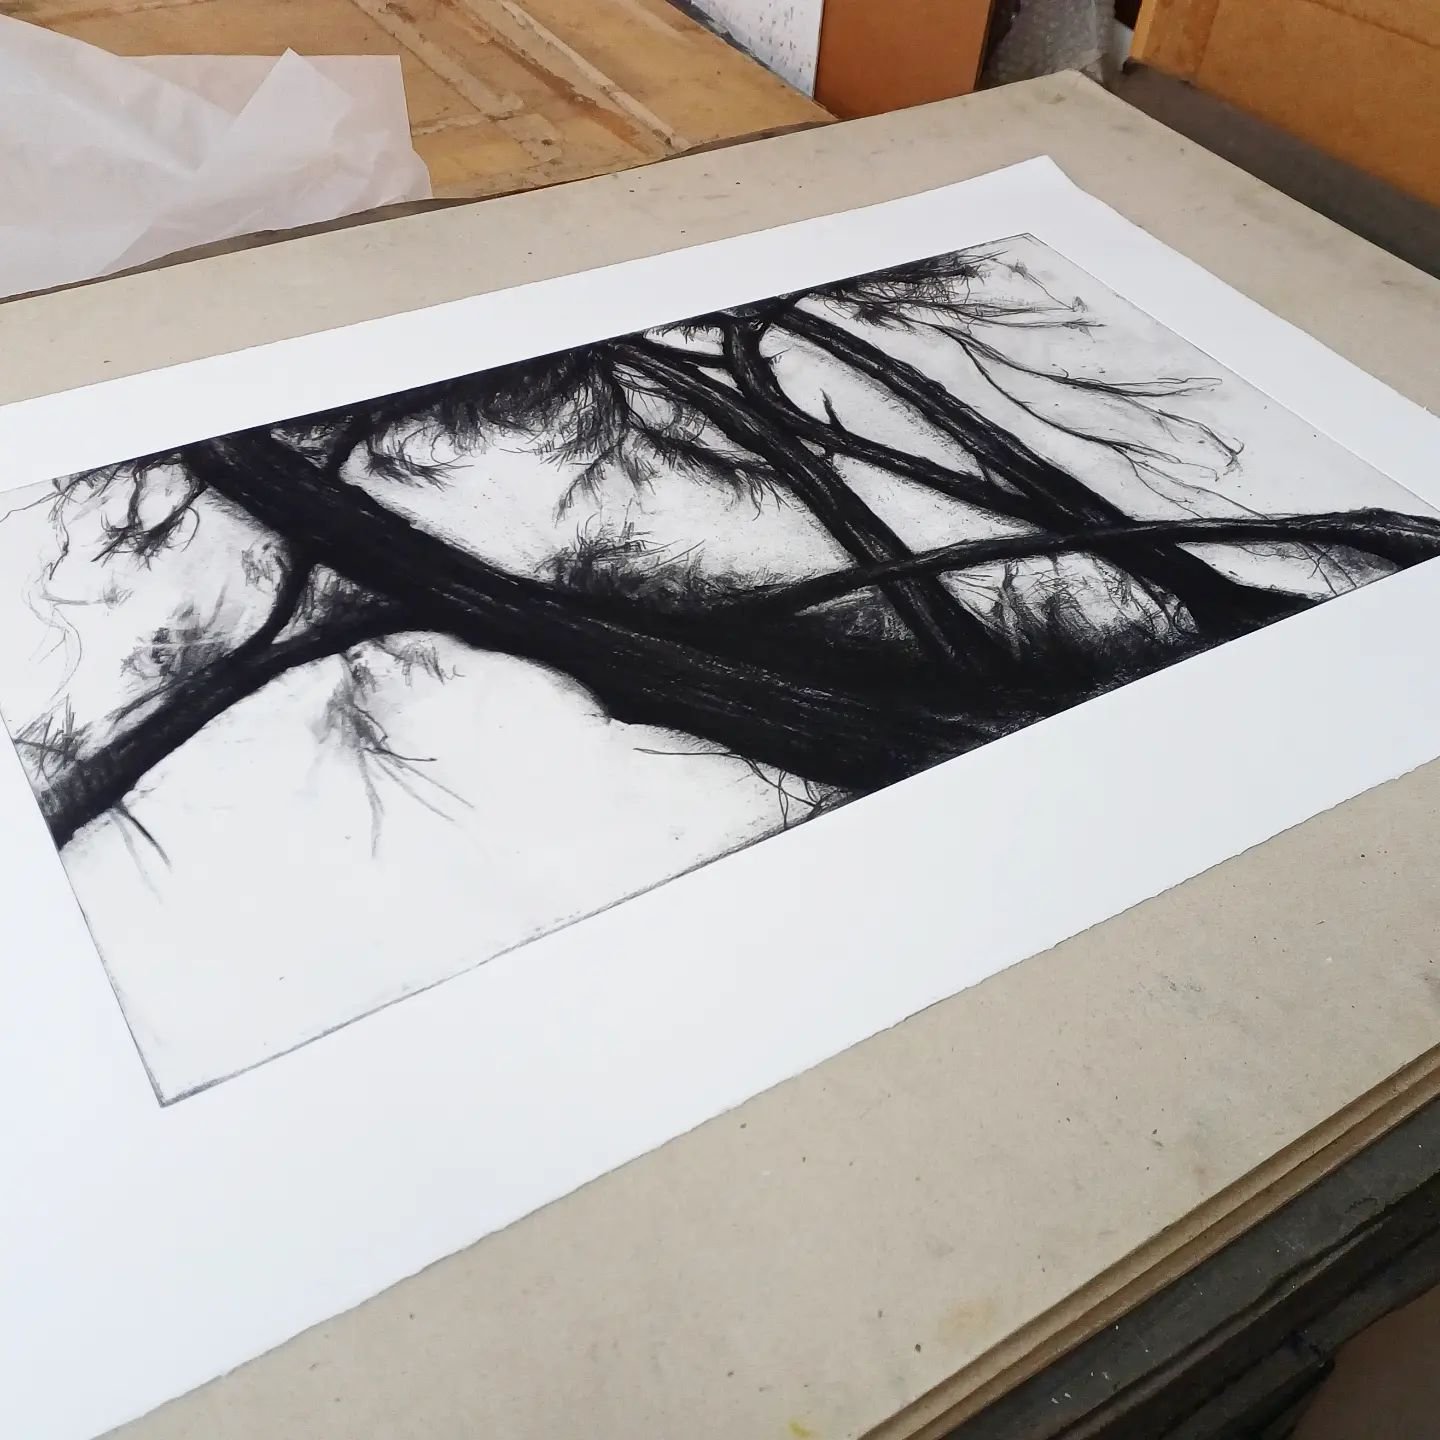 'Composition of the Pines, in Black &amp; White' just proofed. Based on graphite and charcoal studies and one of three new plates. Its a wide panoramic composition and at over 75 cm wide, its been an interesting plate to work on.

#editioning
#blacka